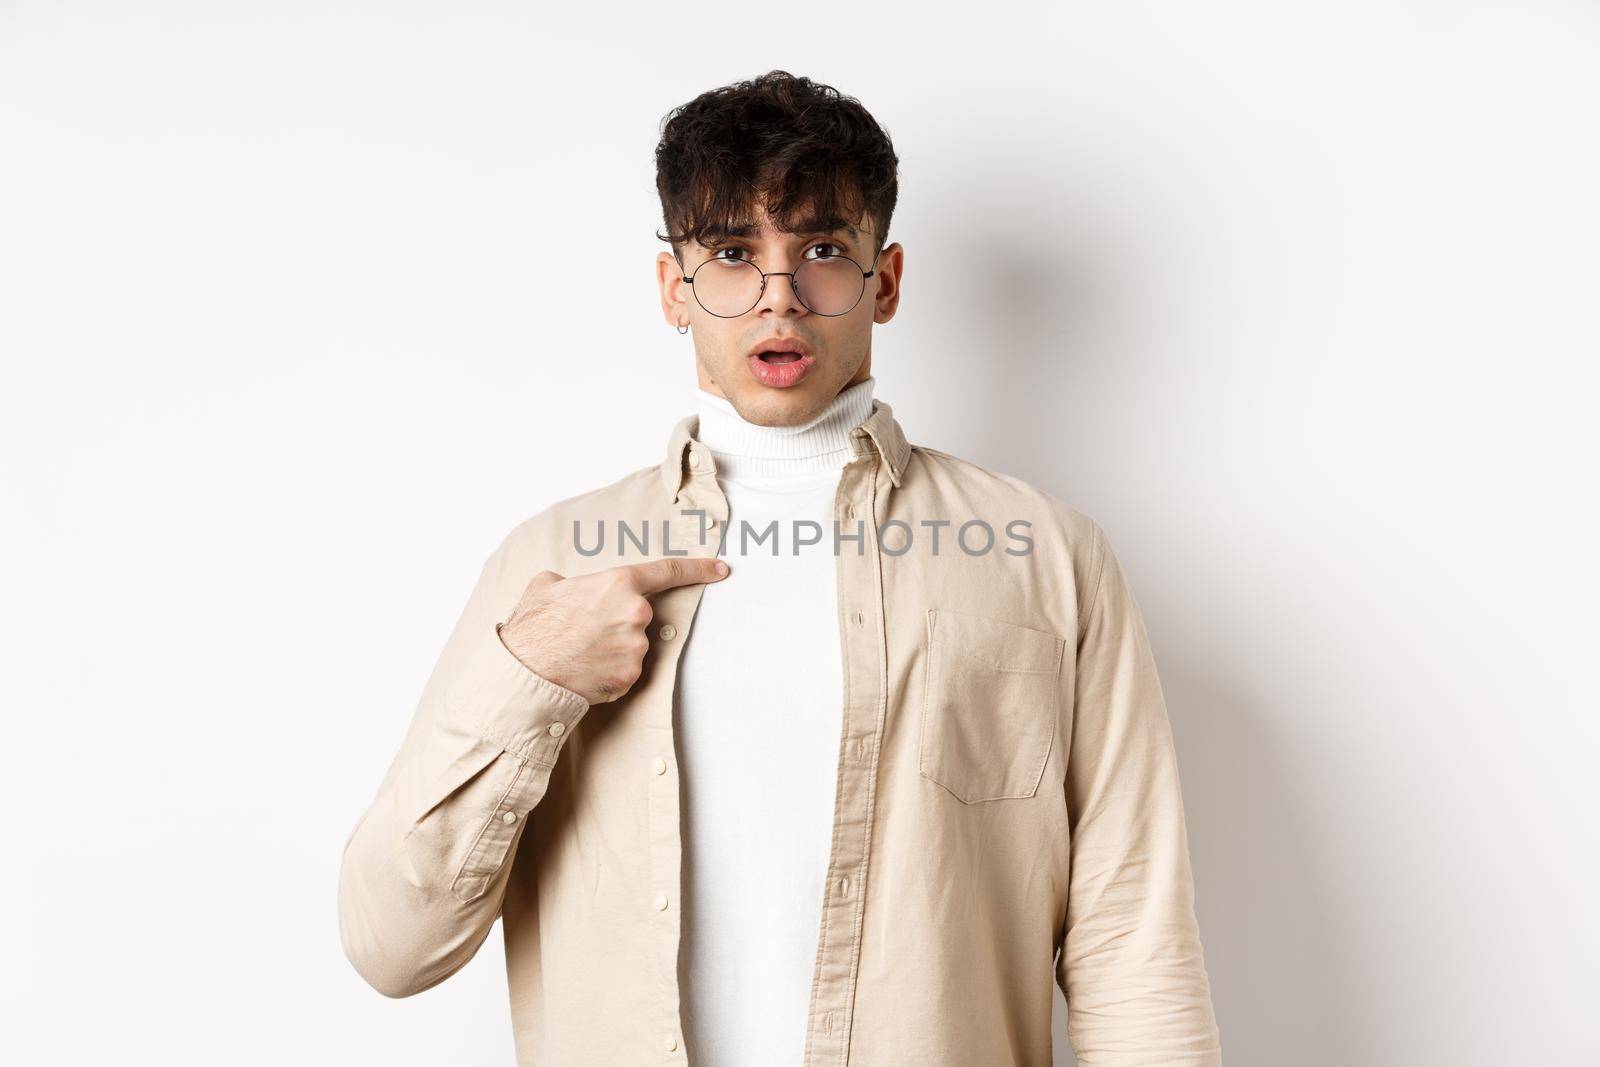 Confused and surprised young man pointing at himself, being chosen or accused, standing on white background.